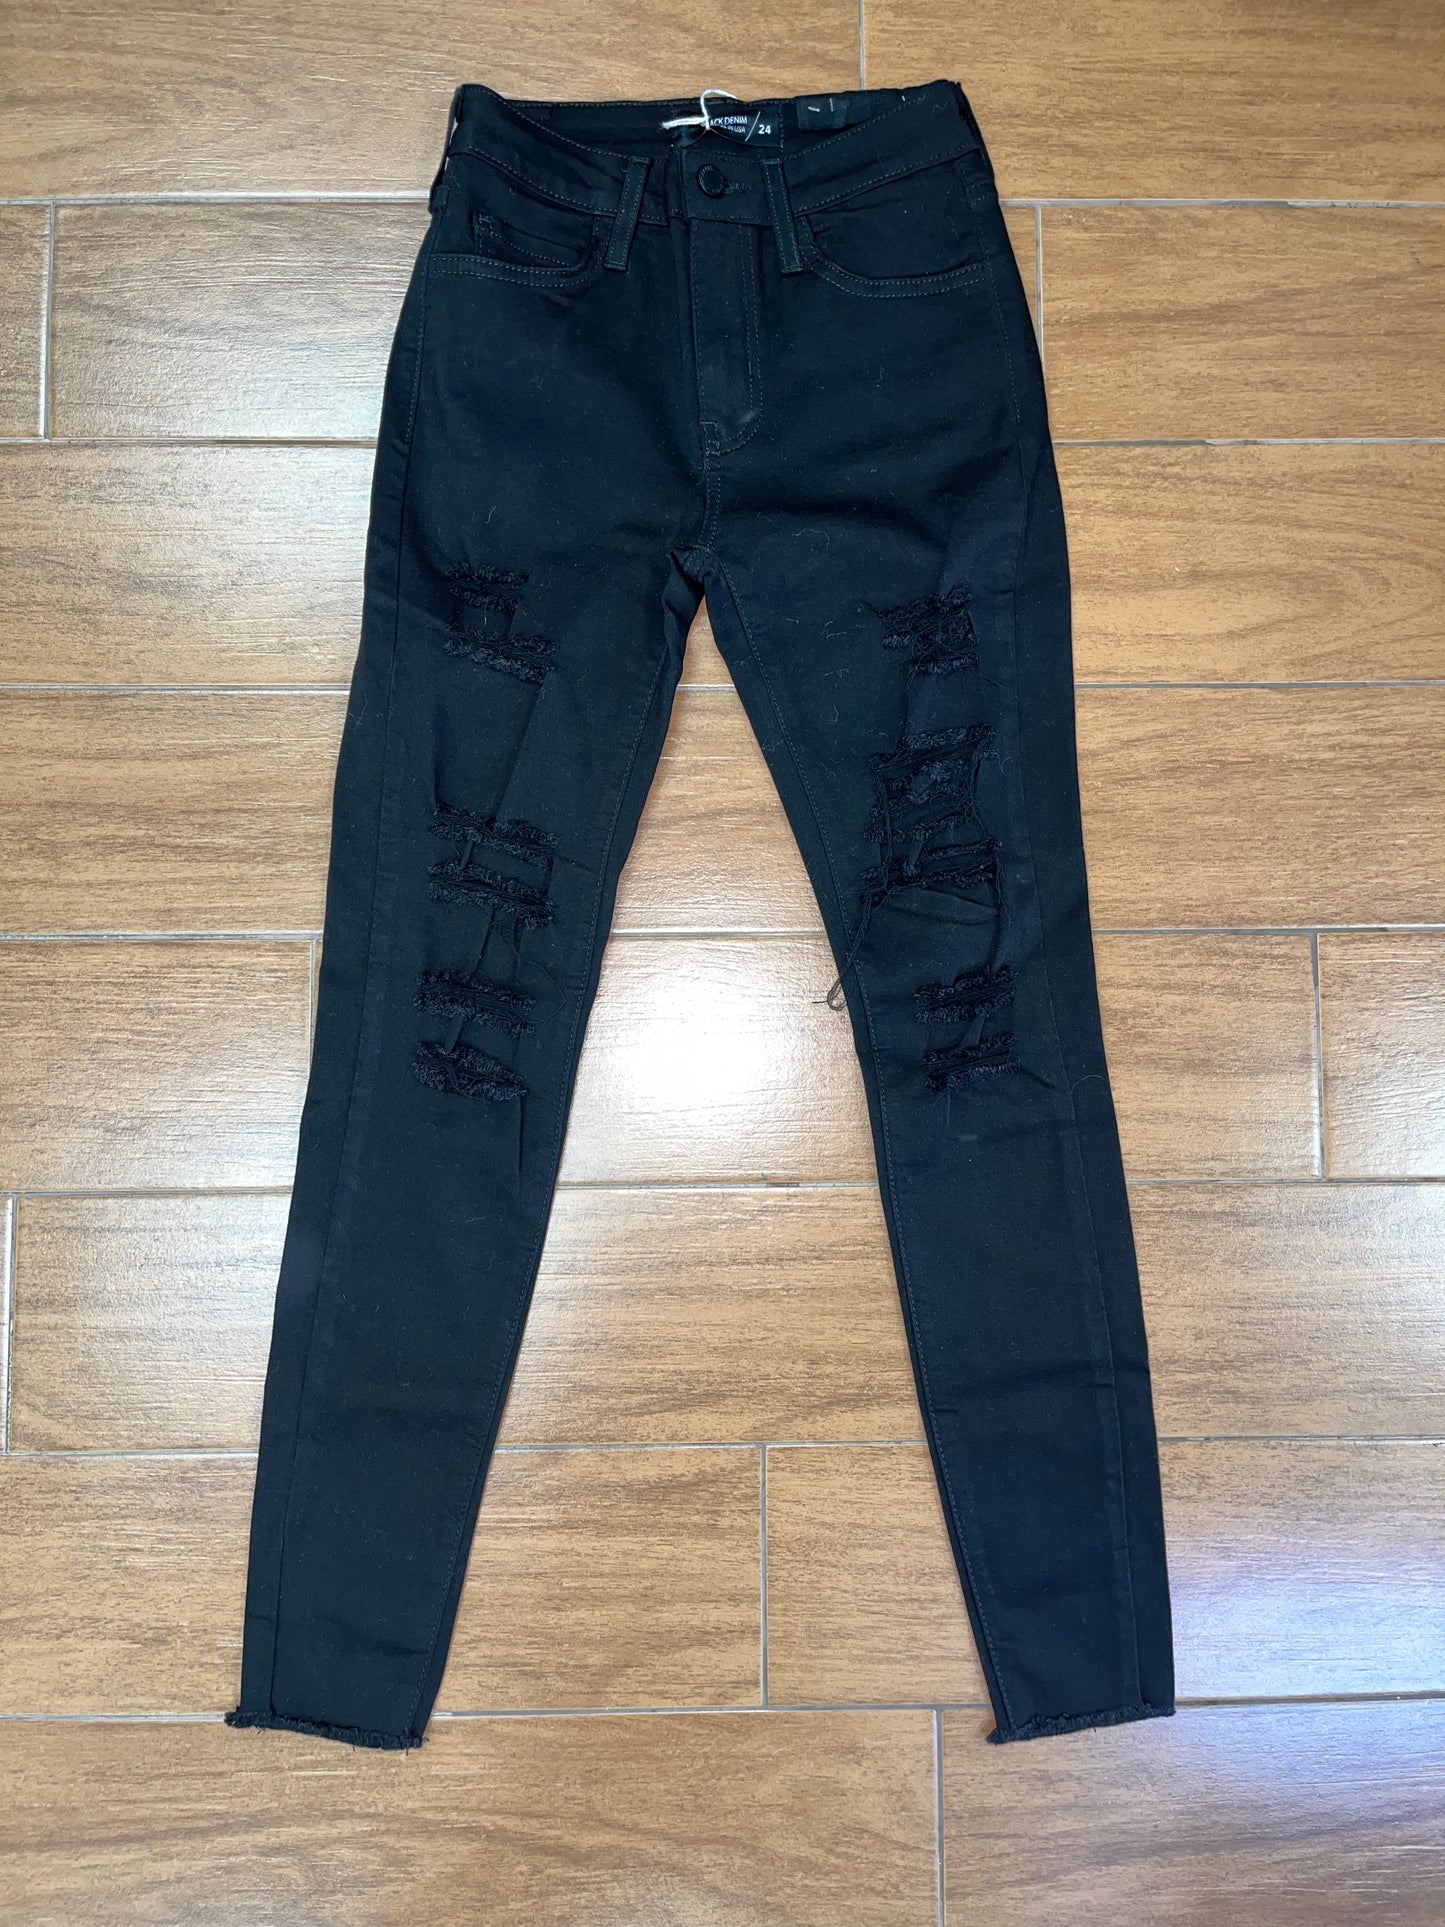 Black Jeans with Distressed Legs and Hems